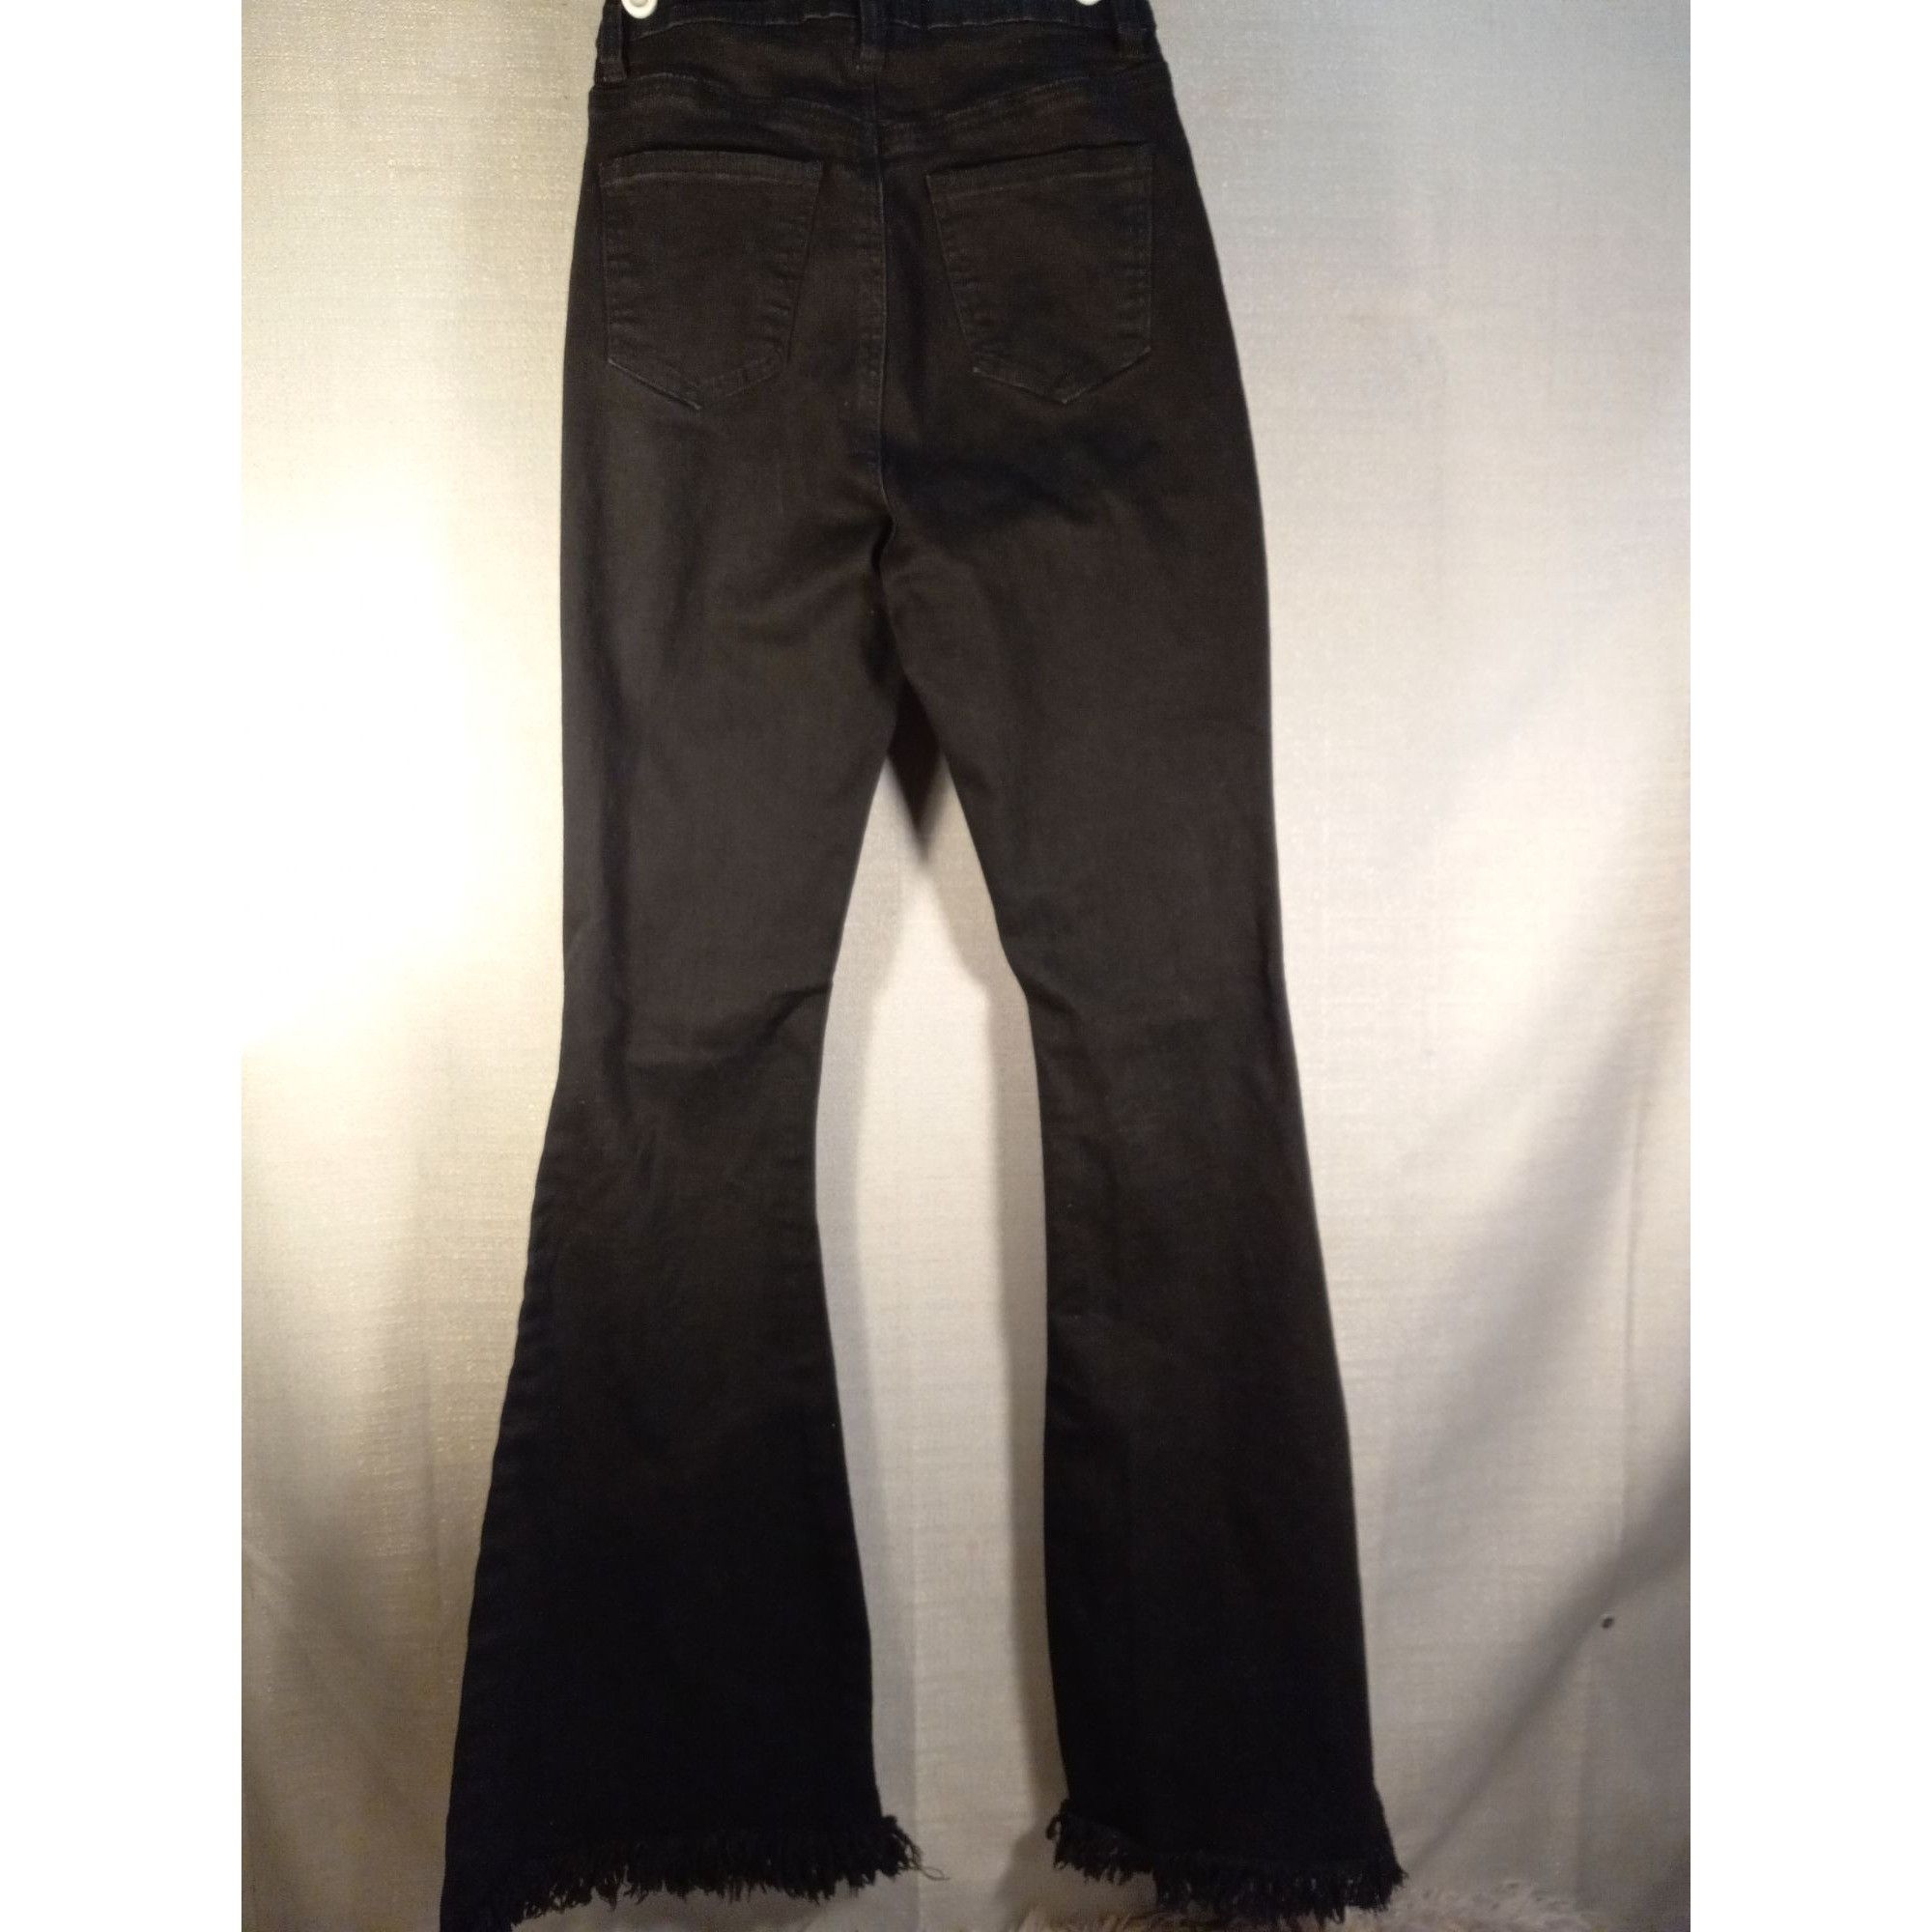 Christian Kimber K.I.M Kimberly woman's S black flare frayer belle buttom jea Size 32" / US 10 / IT 46 - 2 Preview